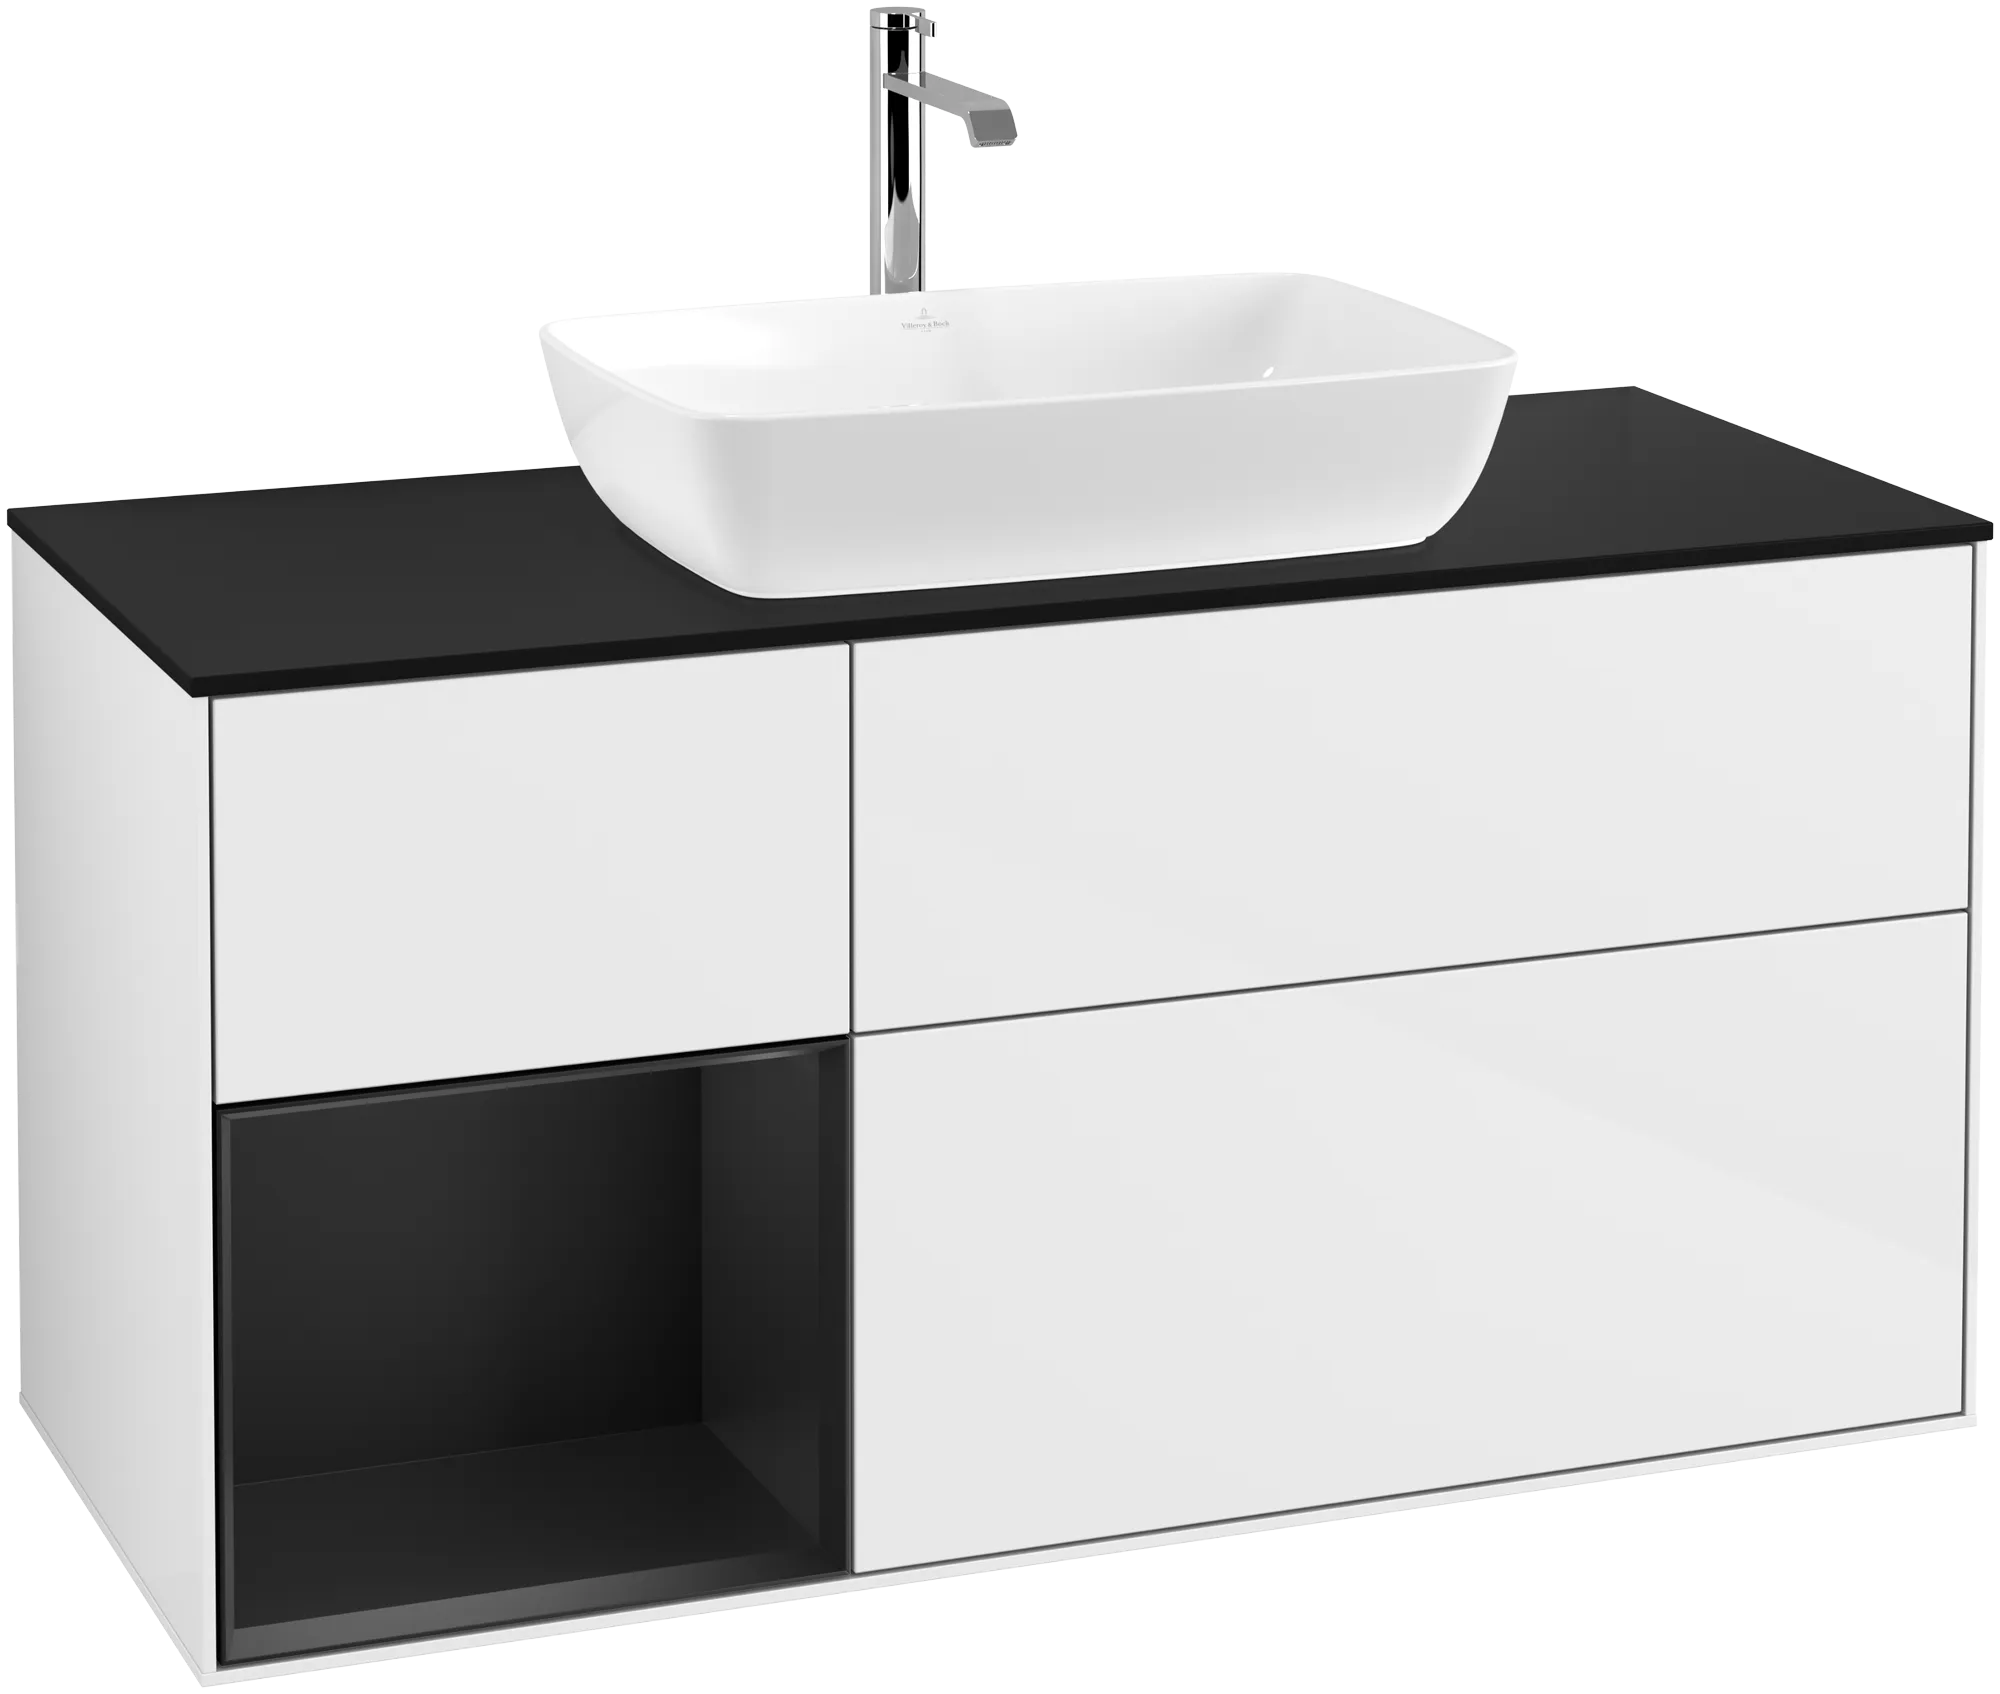 Picture of VILLEROY BOCH Finion Vanity unit, with lighting, 3 pull-out compartments, 1200 x 603 x 501 mm, Glossy White Lacquer / Black Matt Lacquer / Glass Black Matt #G822PDGF